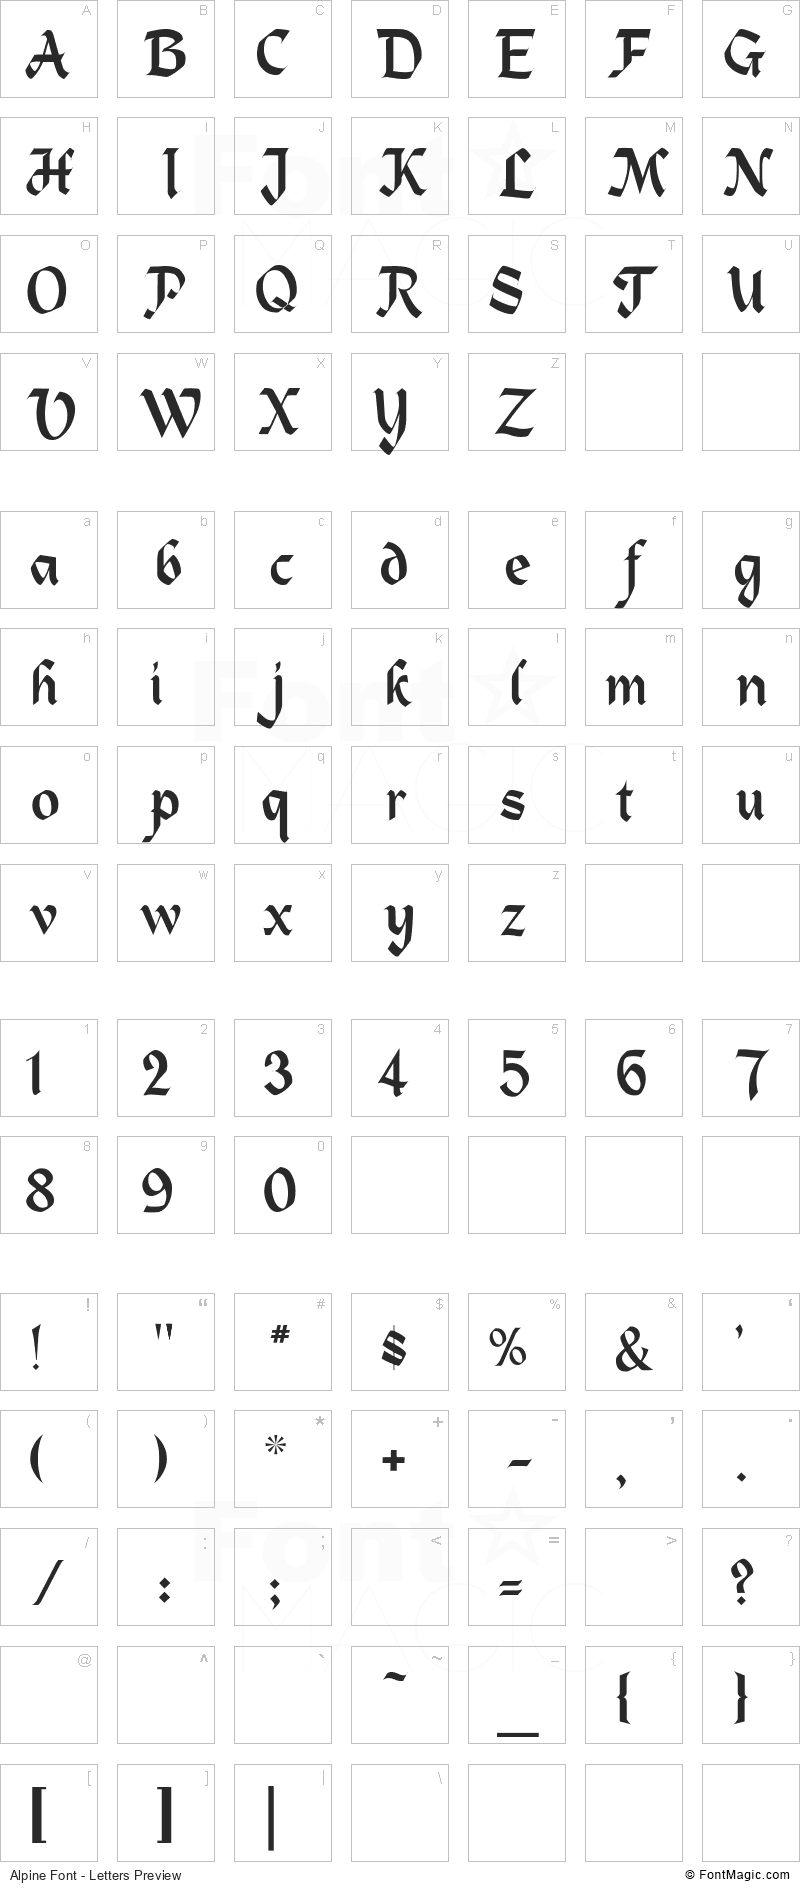 Alpine Font - All Latters Preview Chart